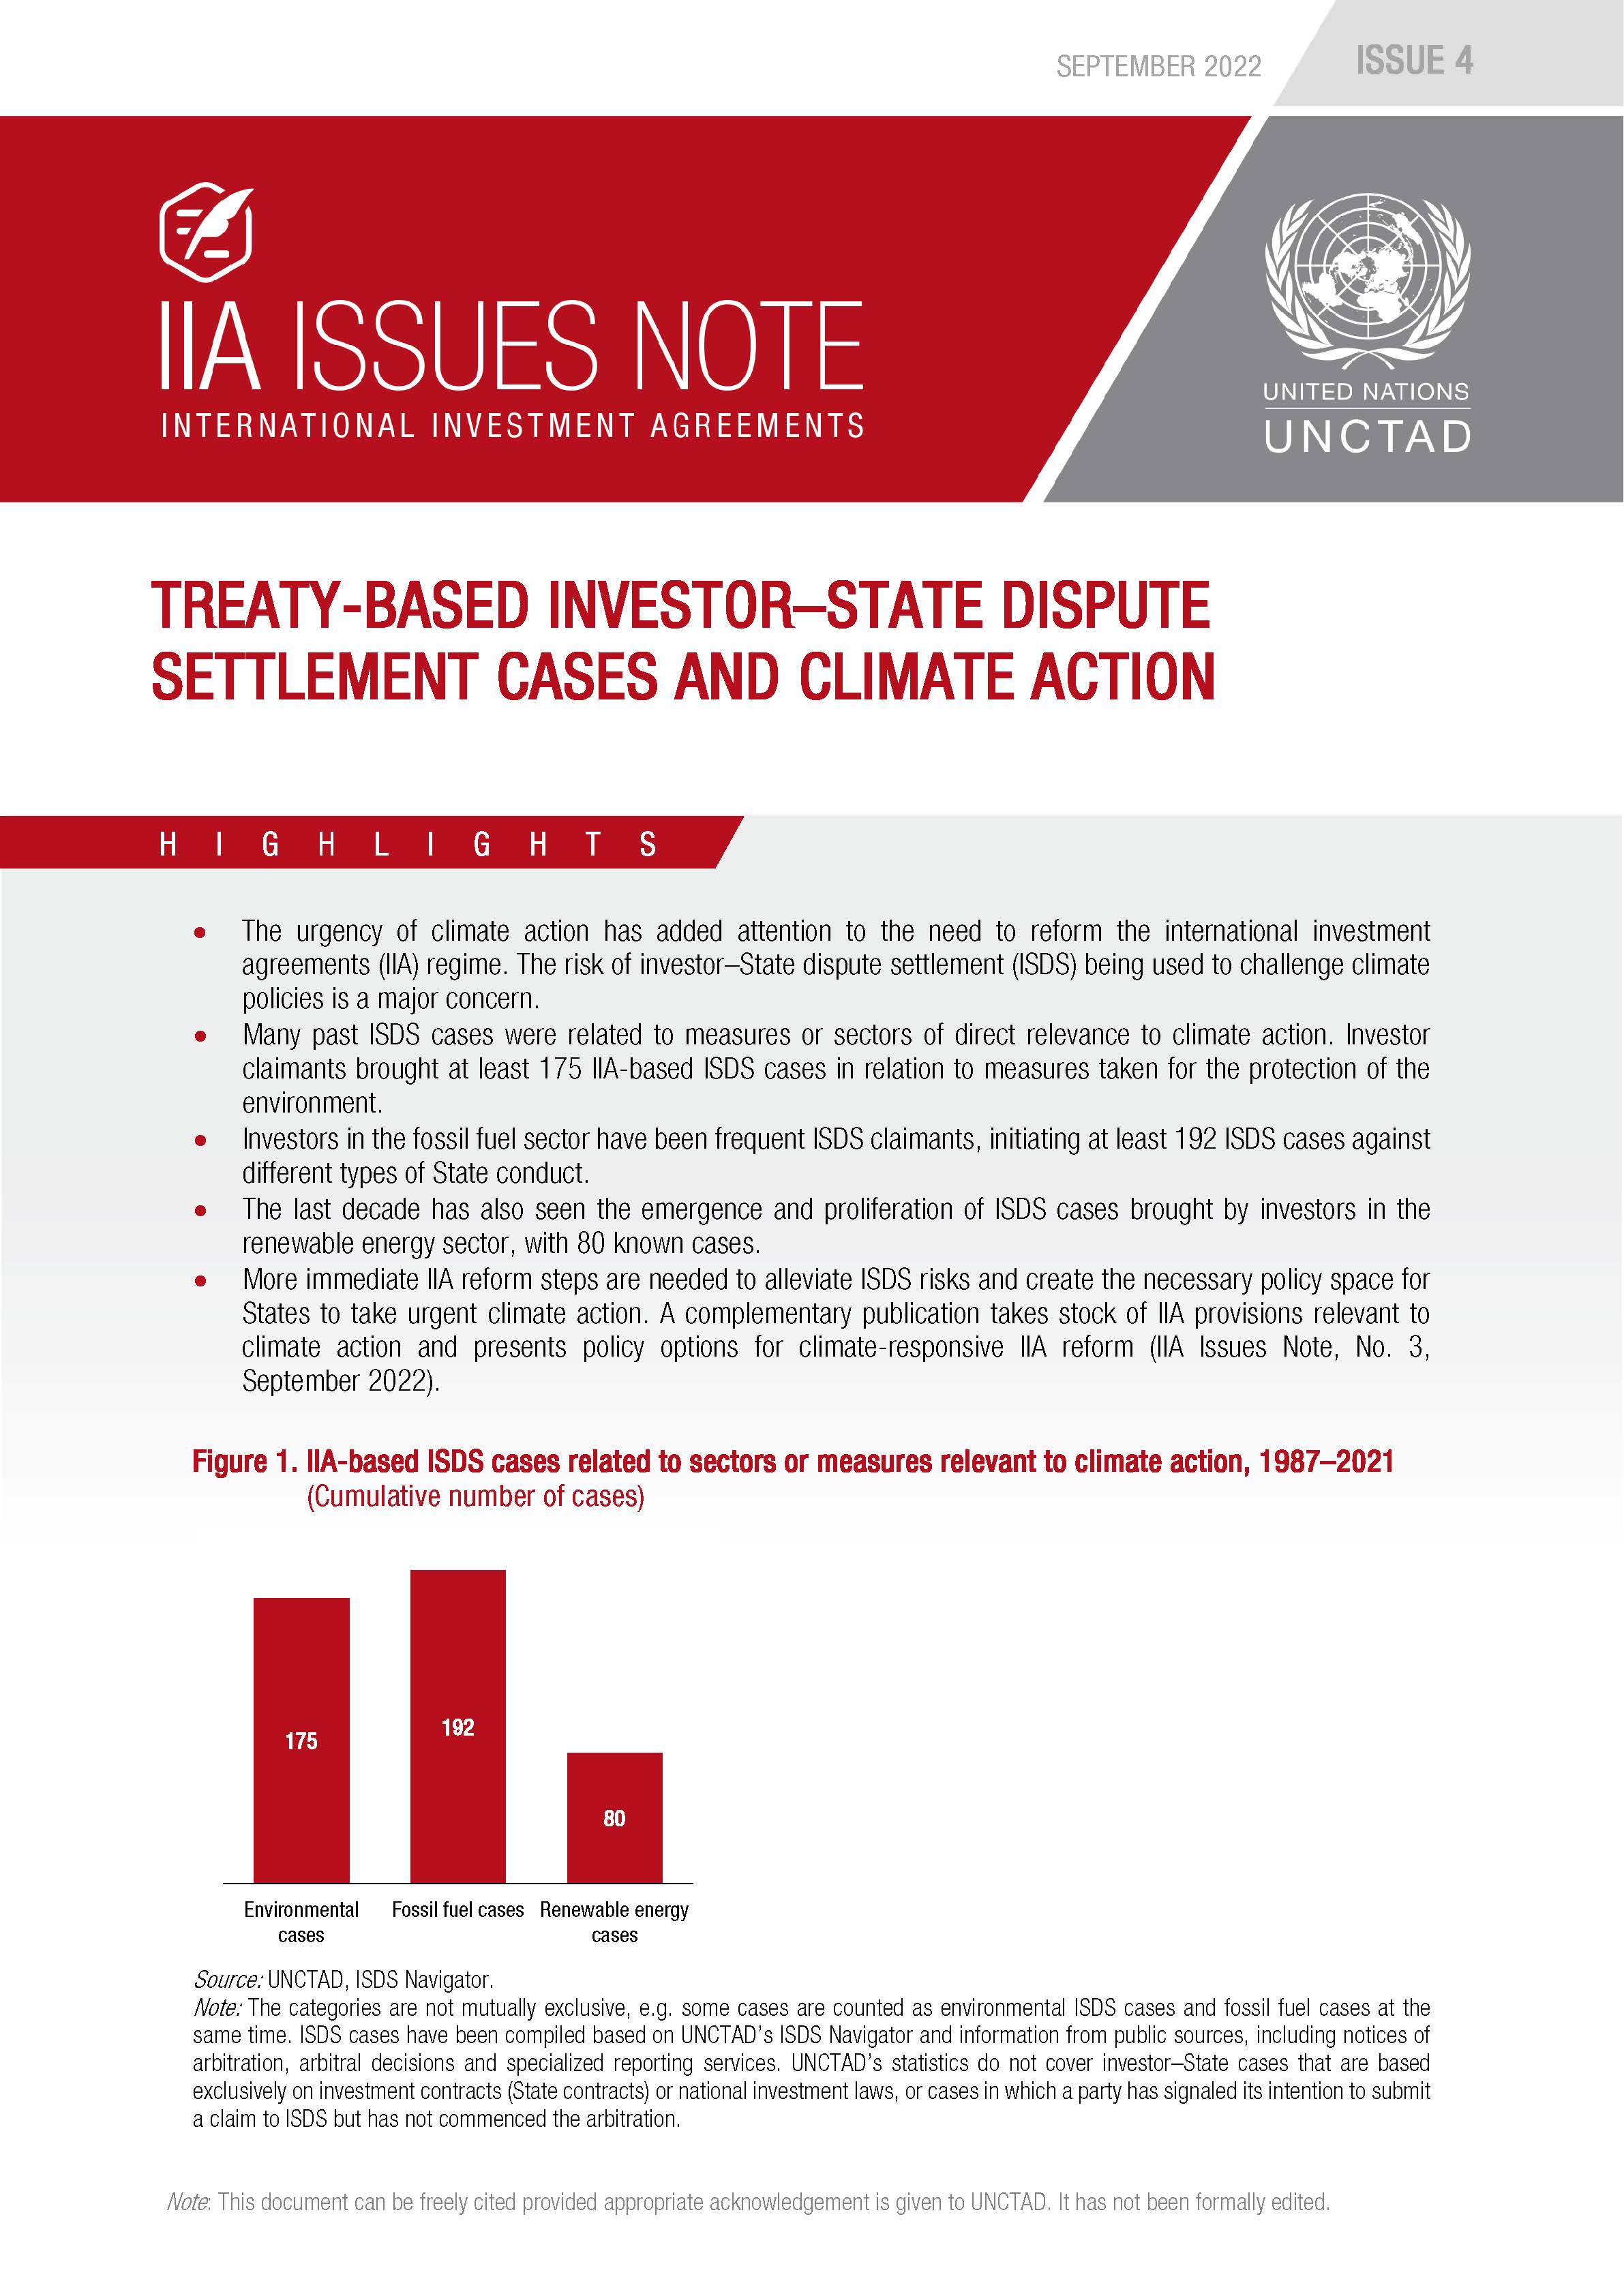 Treaty-based Investor–State Dispute Settlement Cases and Climate Action